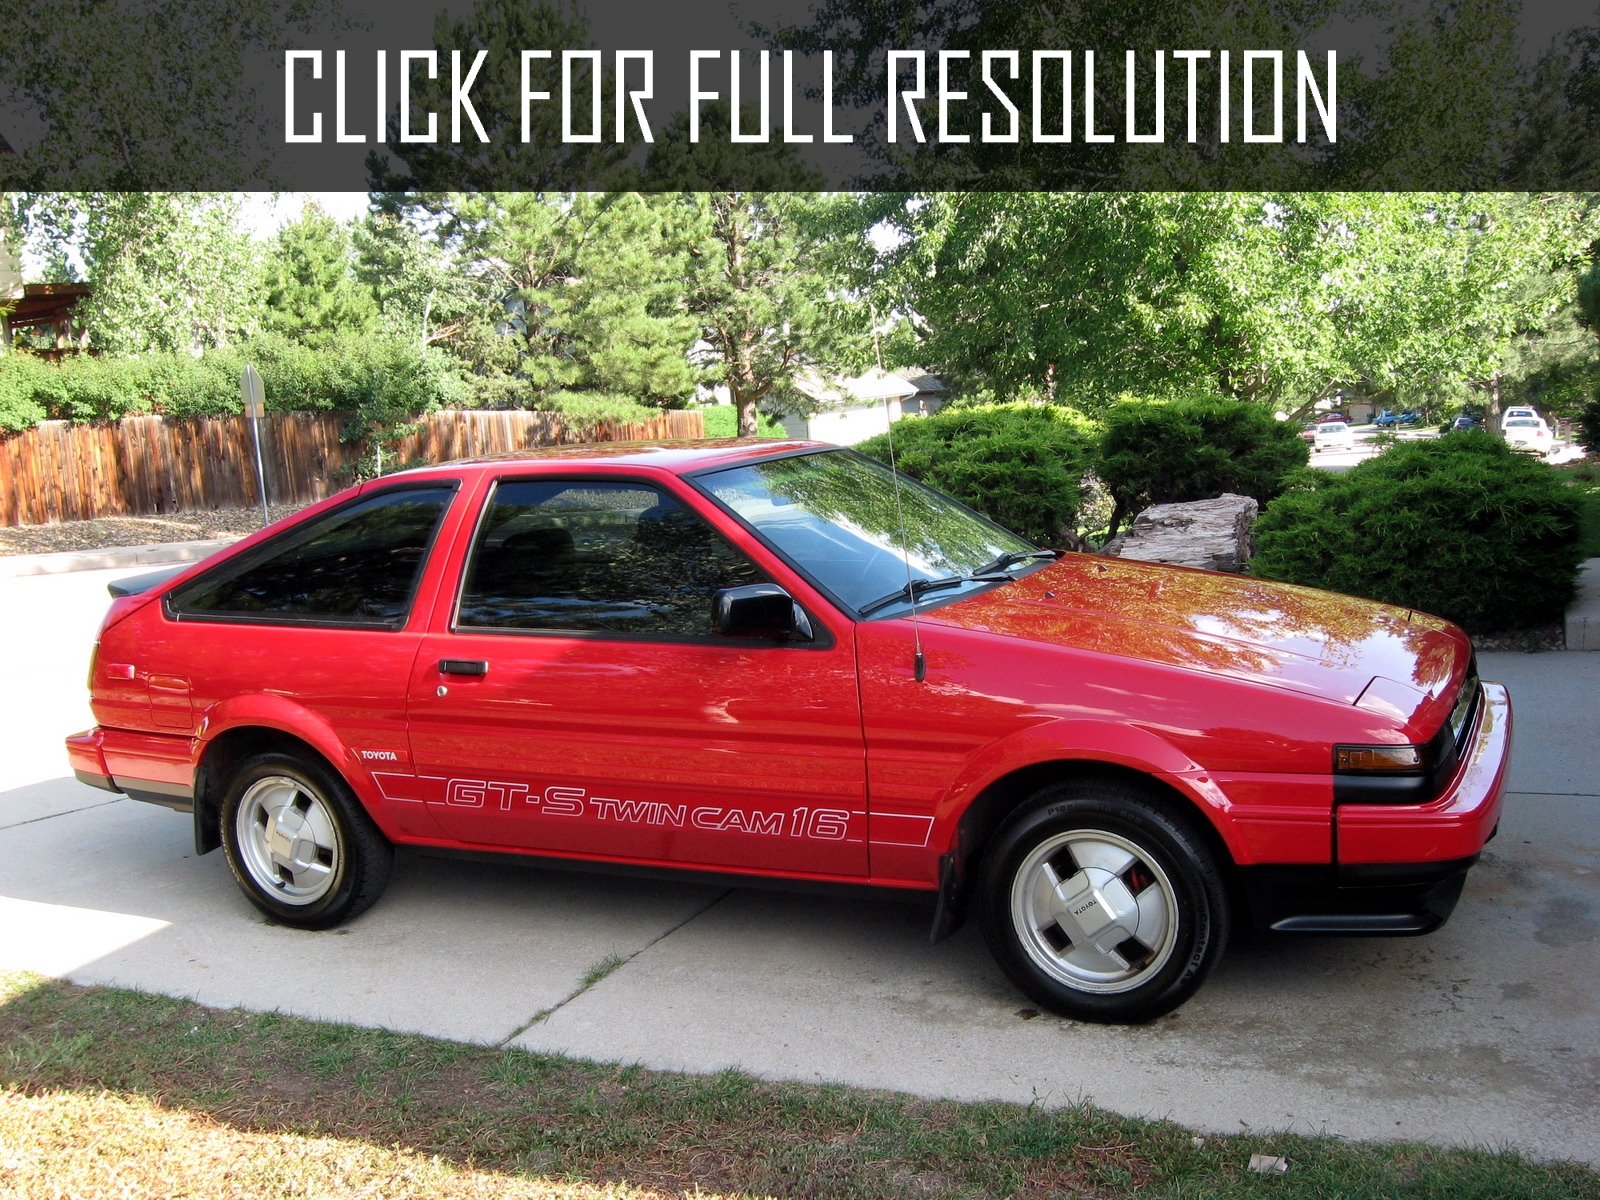 1985 Toyota Corolla Gts Best Image Gallery 19 21 Share And Download